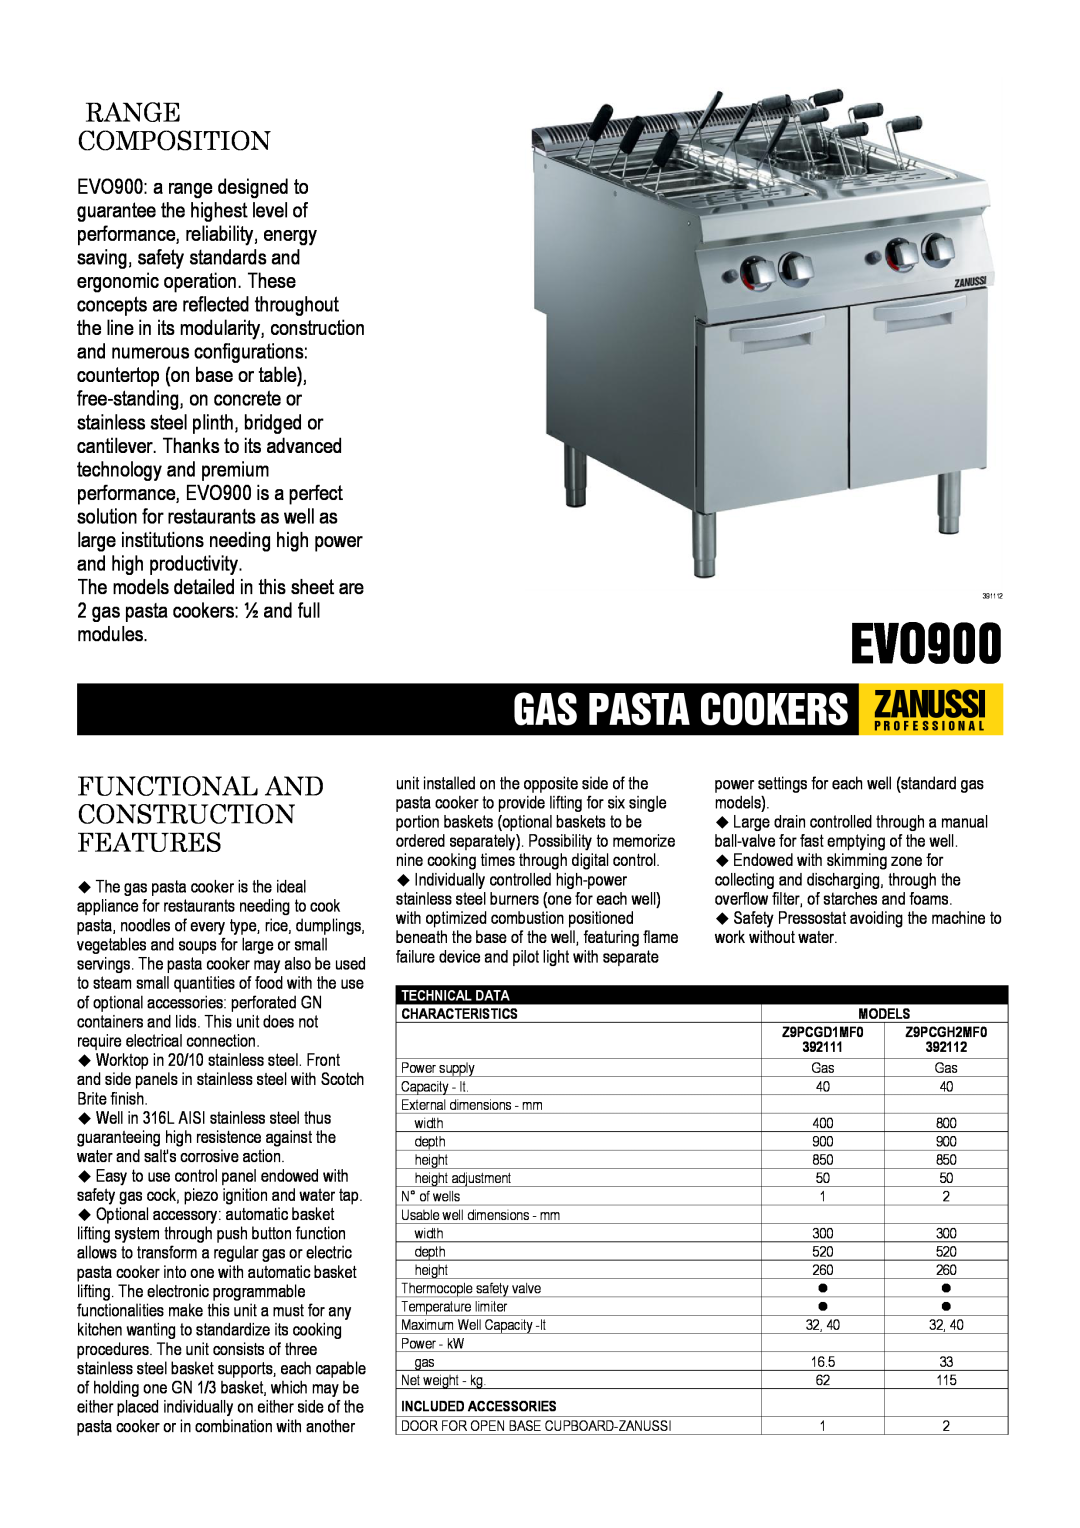 Zanussi 392127 dimensions EVO900, Range Composition, Functional And Construction Features 